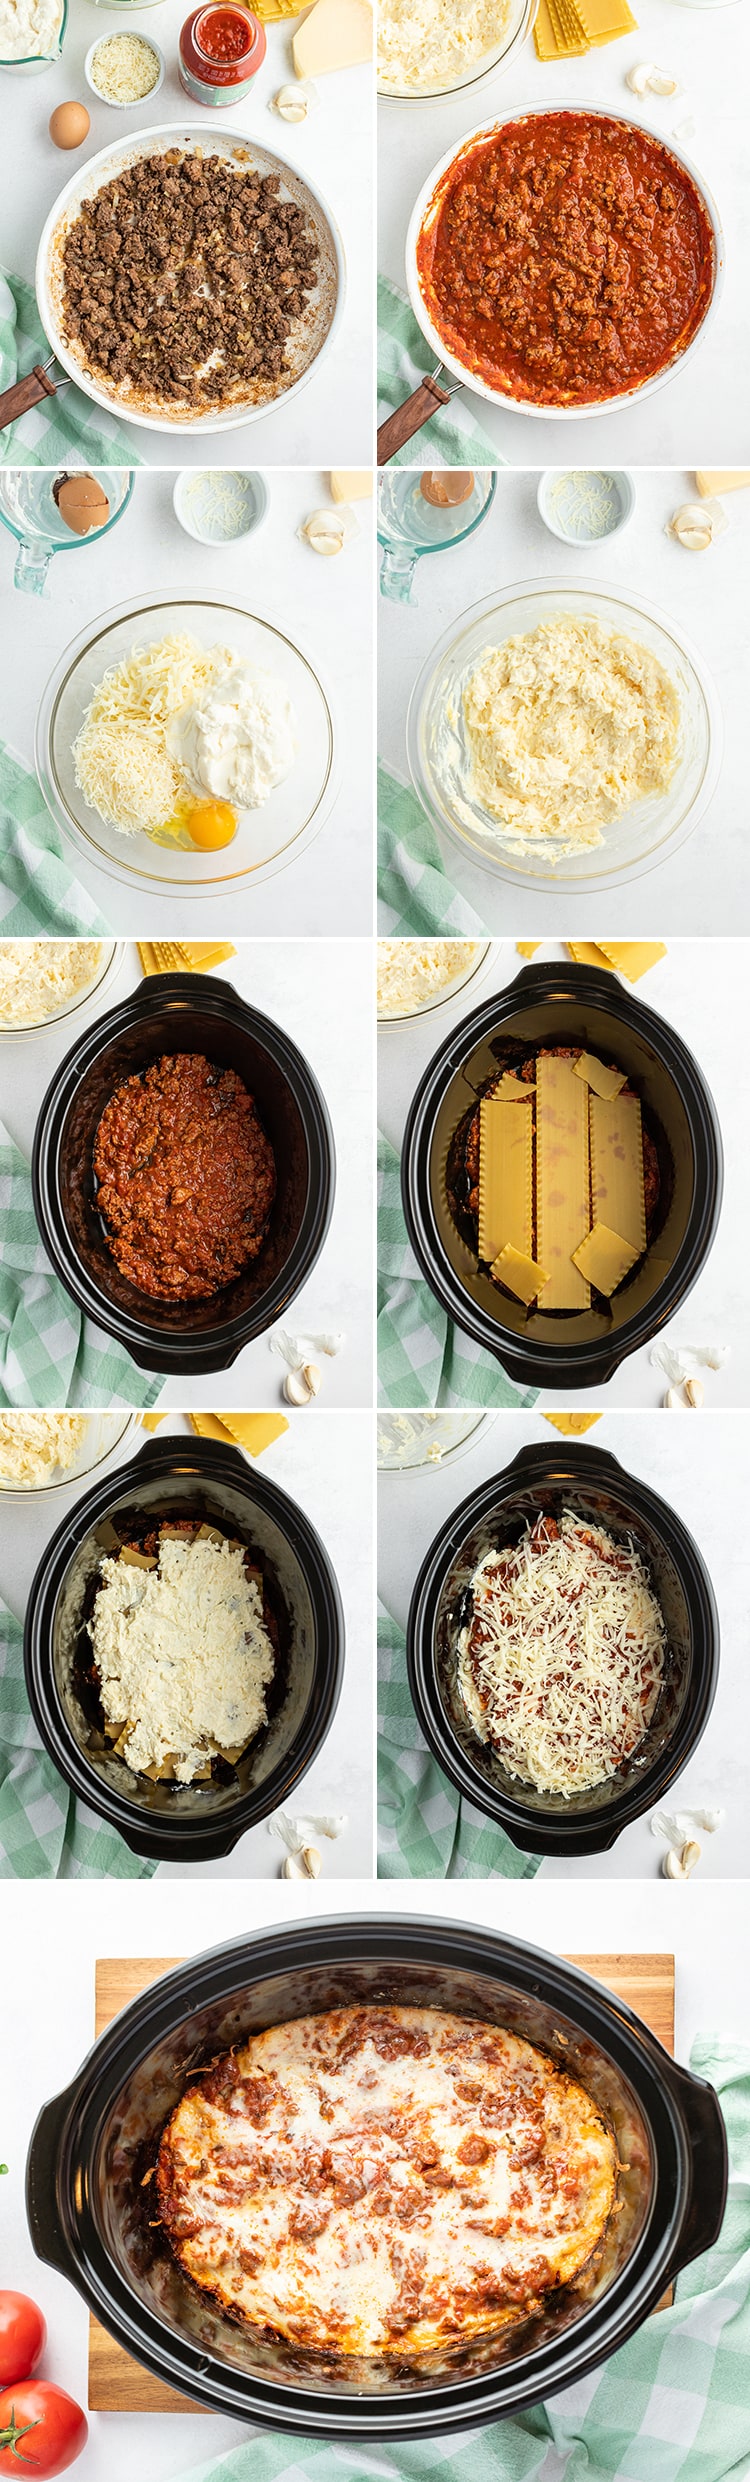 8 step by step photos how to make slow cooker lasagna in a slow cooker.